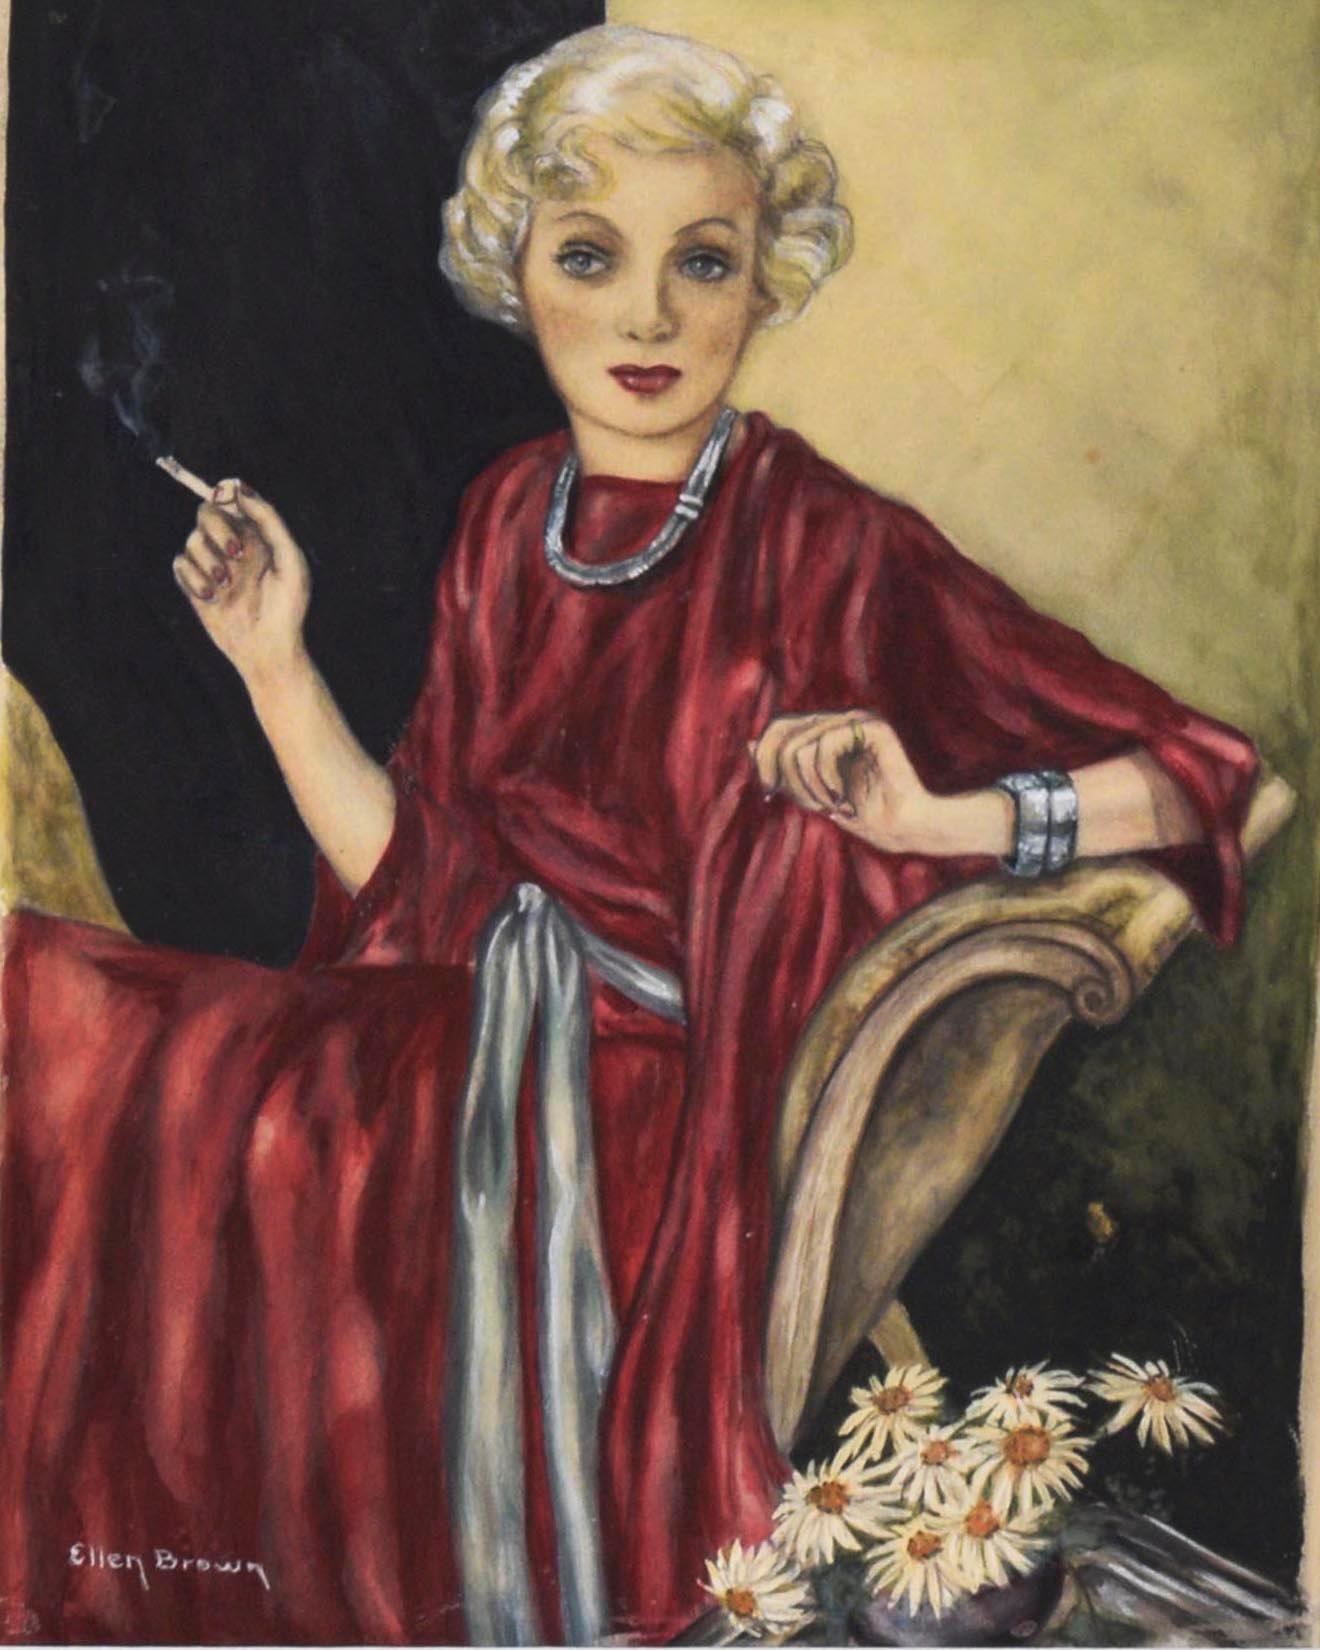 Portrait of Woman in Red Dress - Figurative Study

Watercolor and gouache figurative study of a woman in a red dress by Bay area artist (possibly) Ellen Brown circa 1930-50. The woman is poised, sitting on a brown lounge chair, a cigarette is lit in